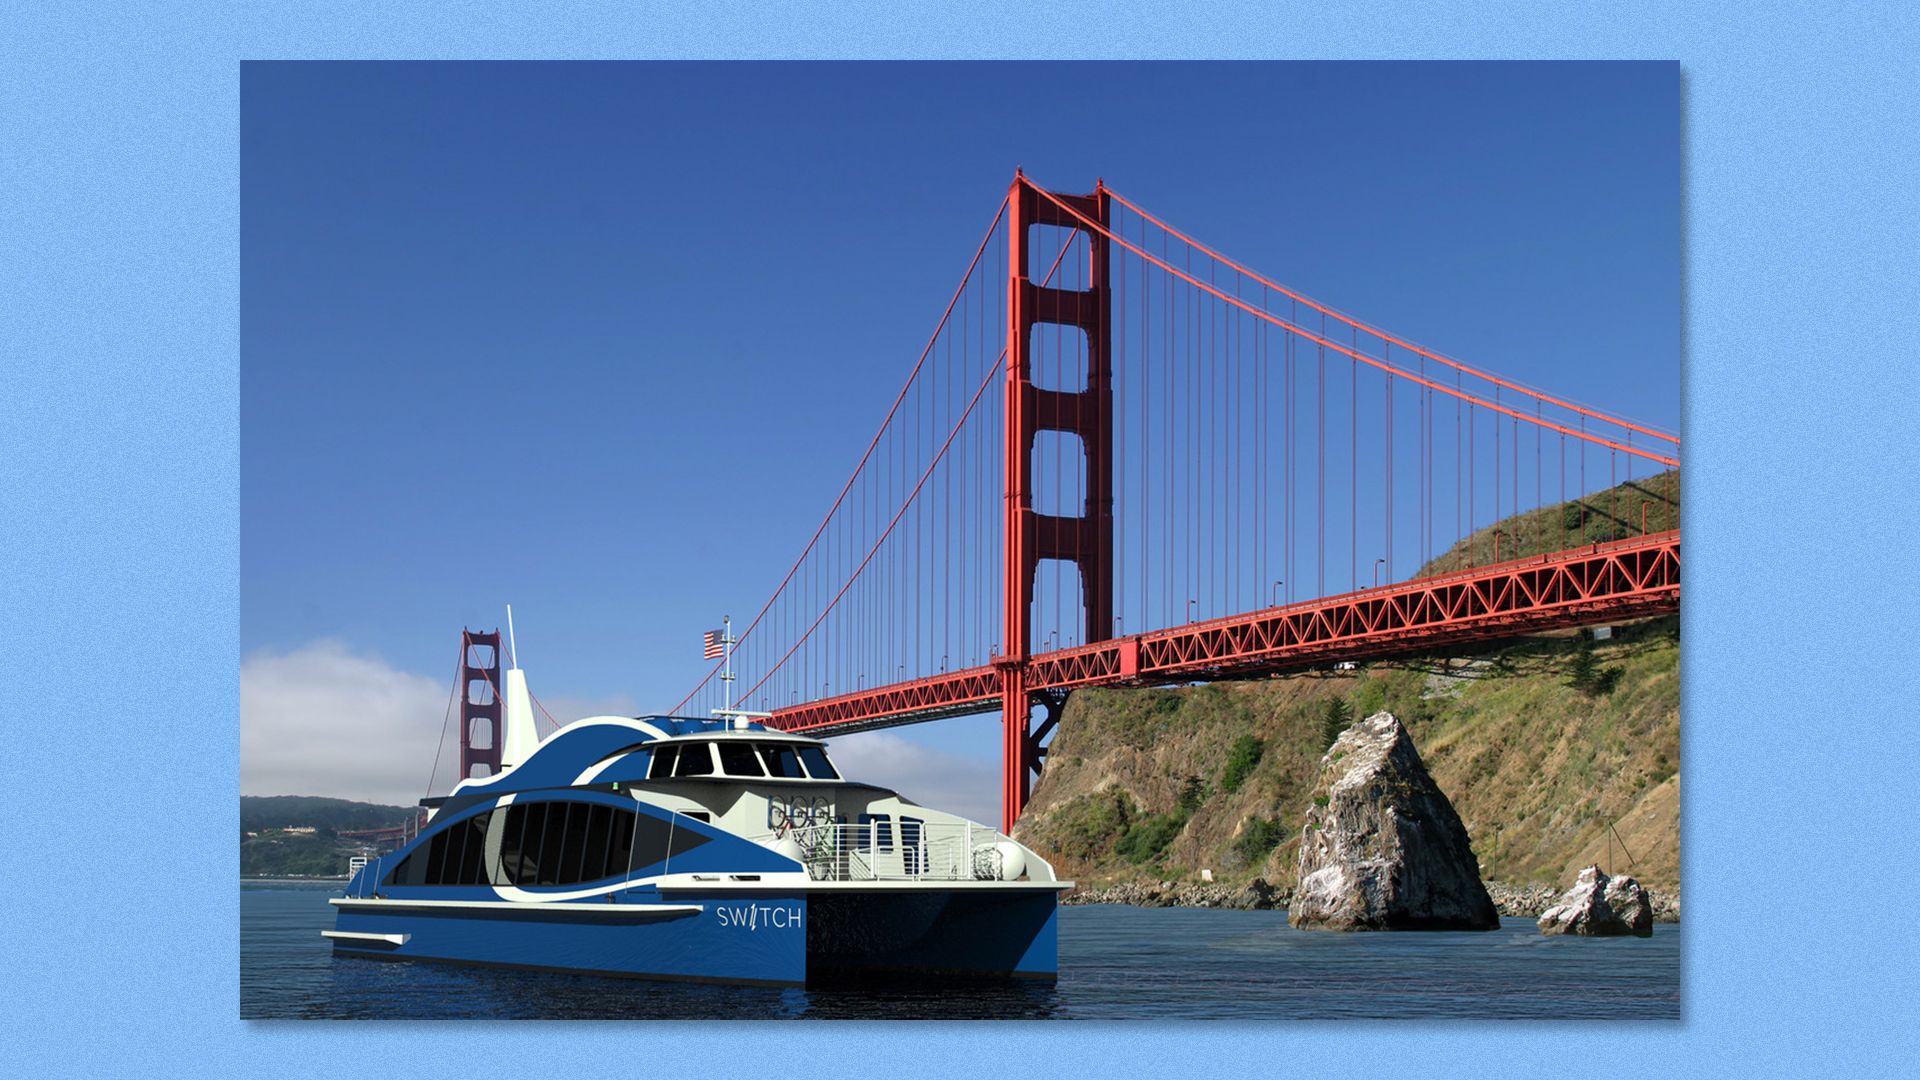 Rendering of the Sea Change, a hydrogen fuel cell-powered ferry near the Golden Gate Bridge in San Francisco